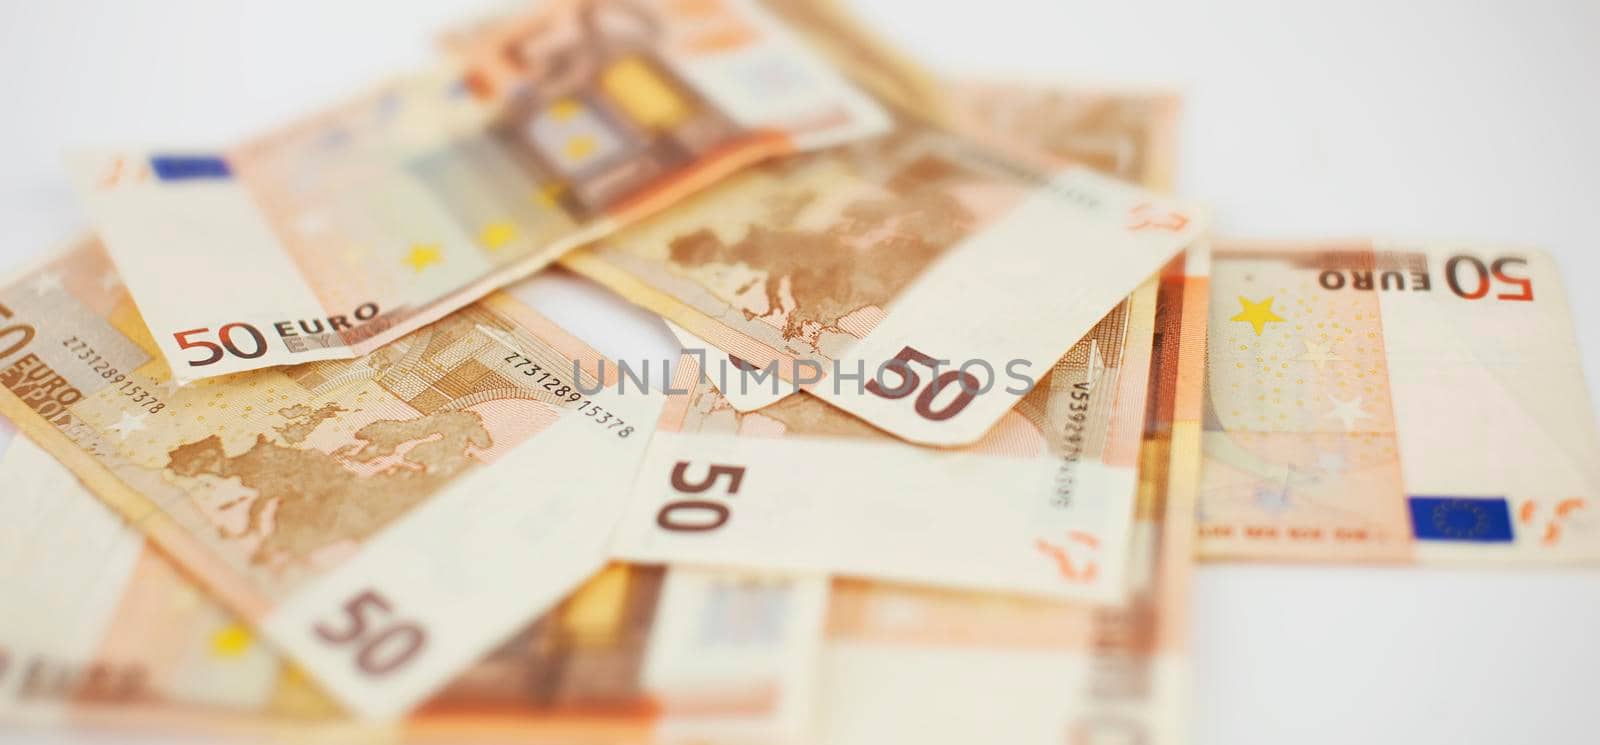 Euro banknotes. 50 euro money. Money finance earning sector concept by SlayCer